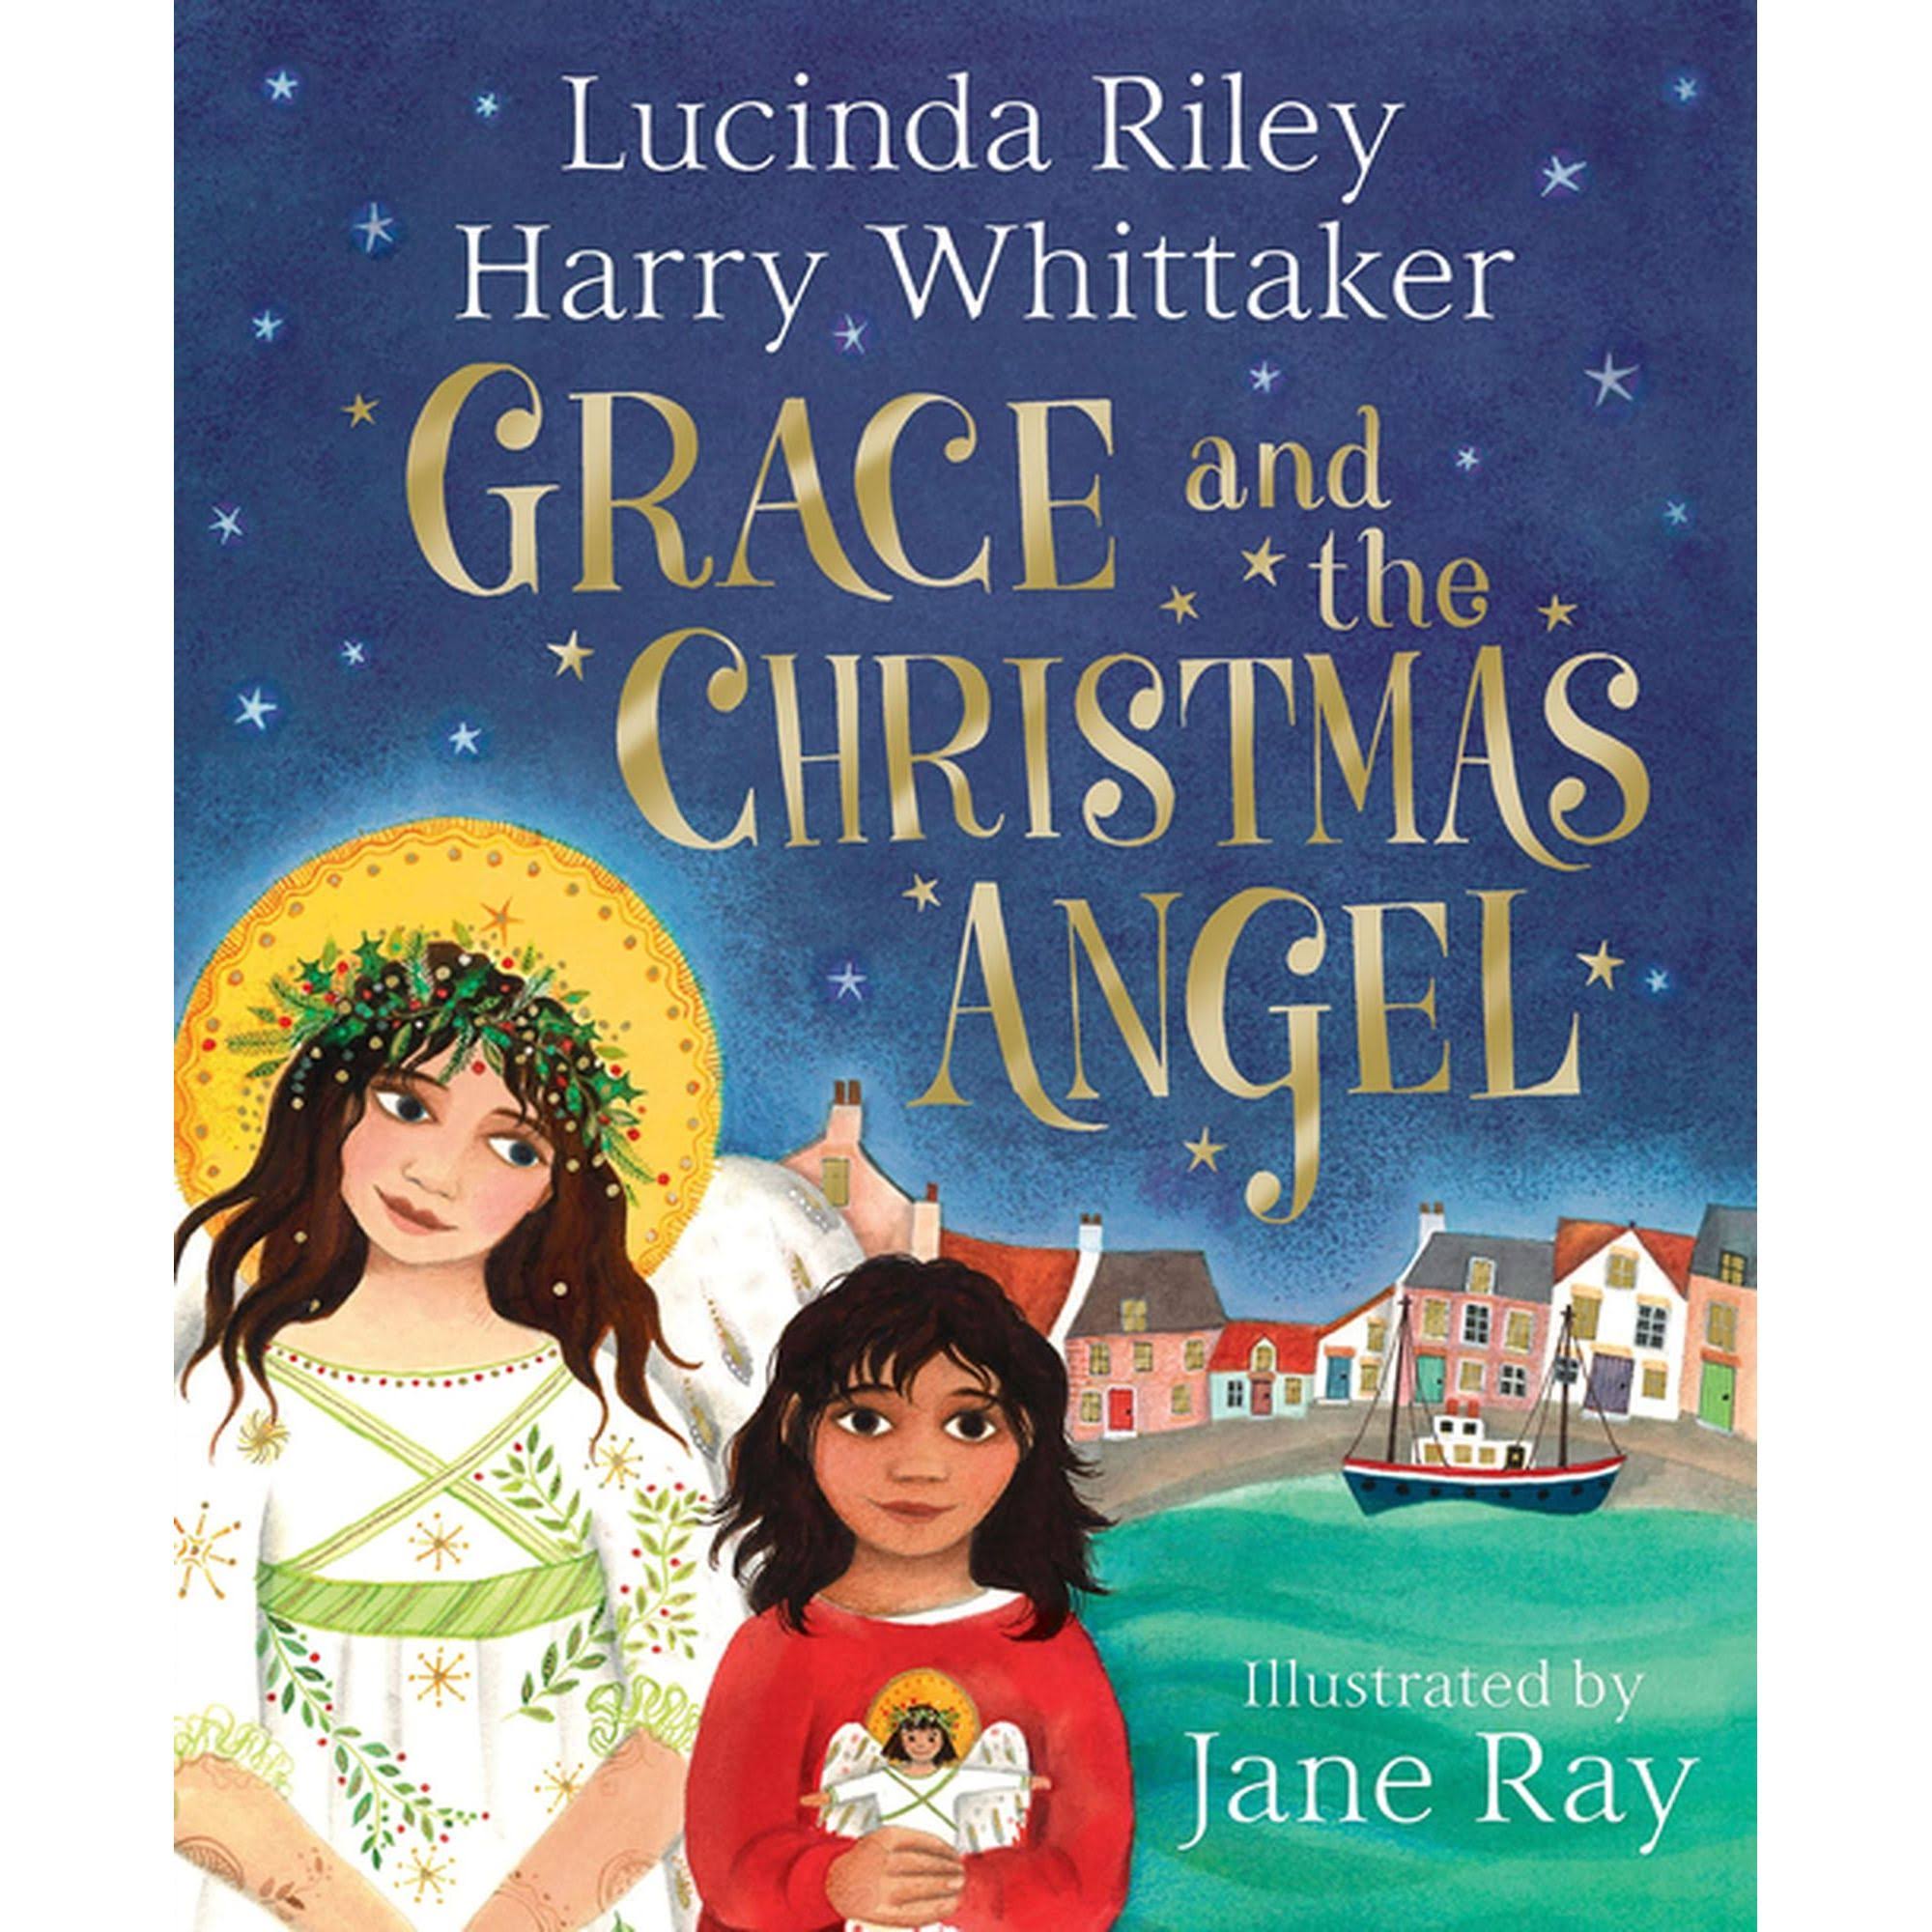 Grace and the Christmas Angel [Book]